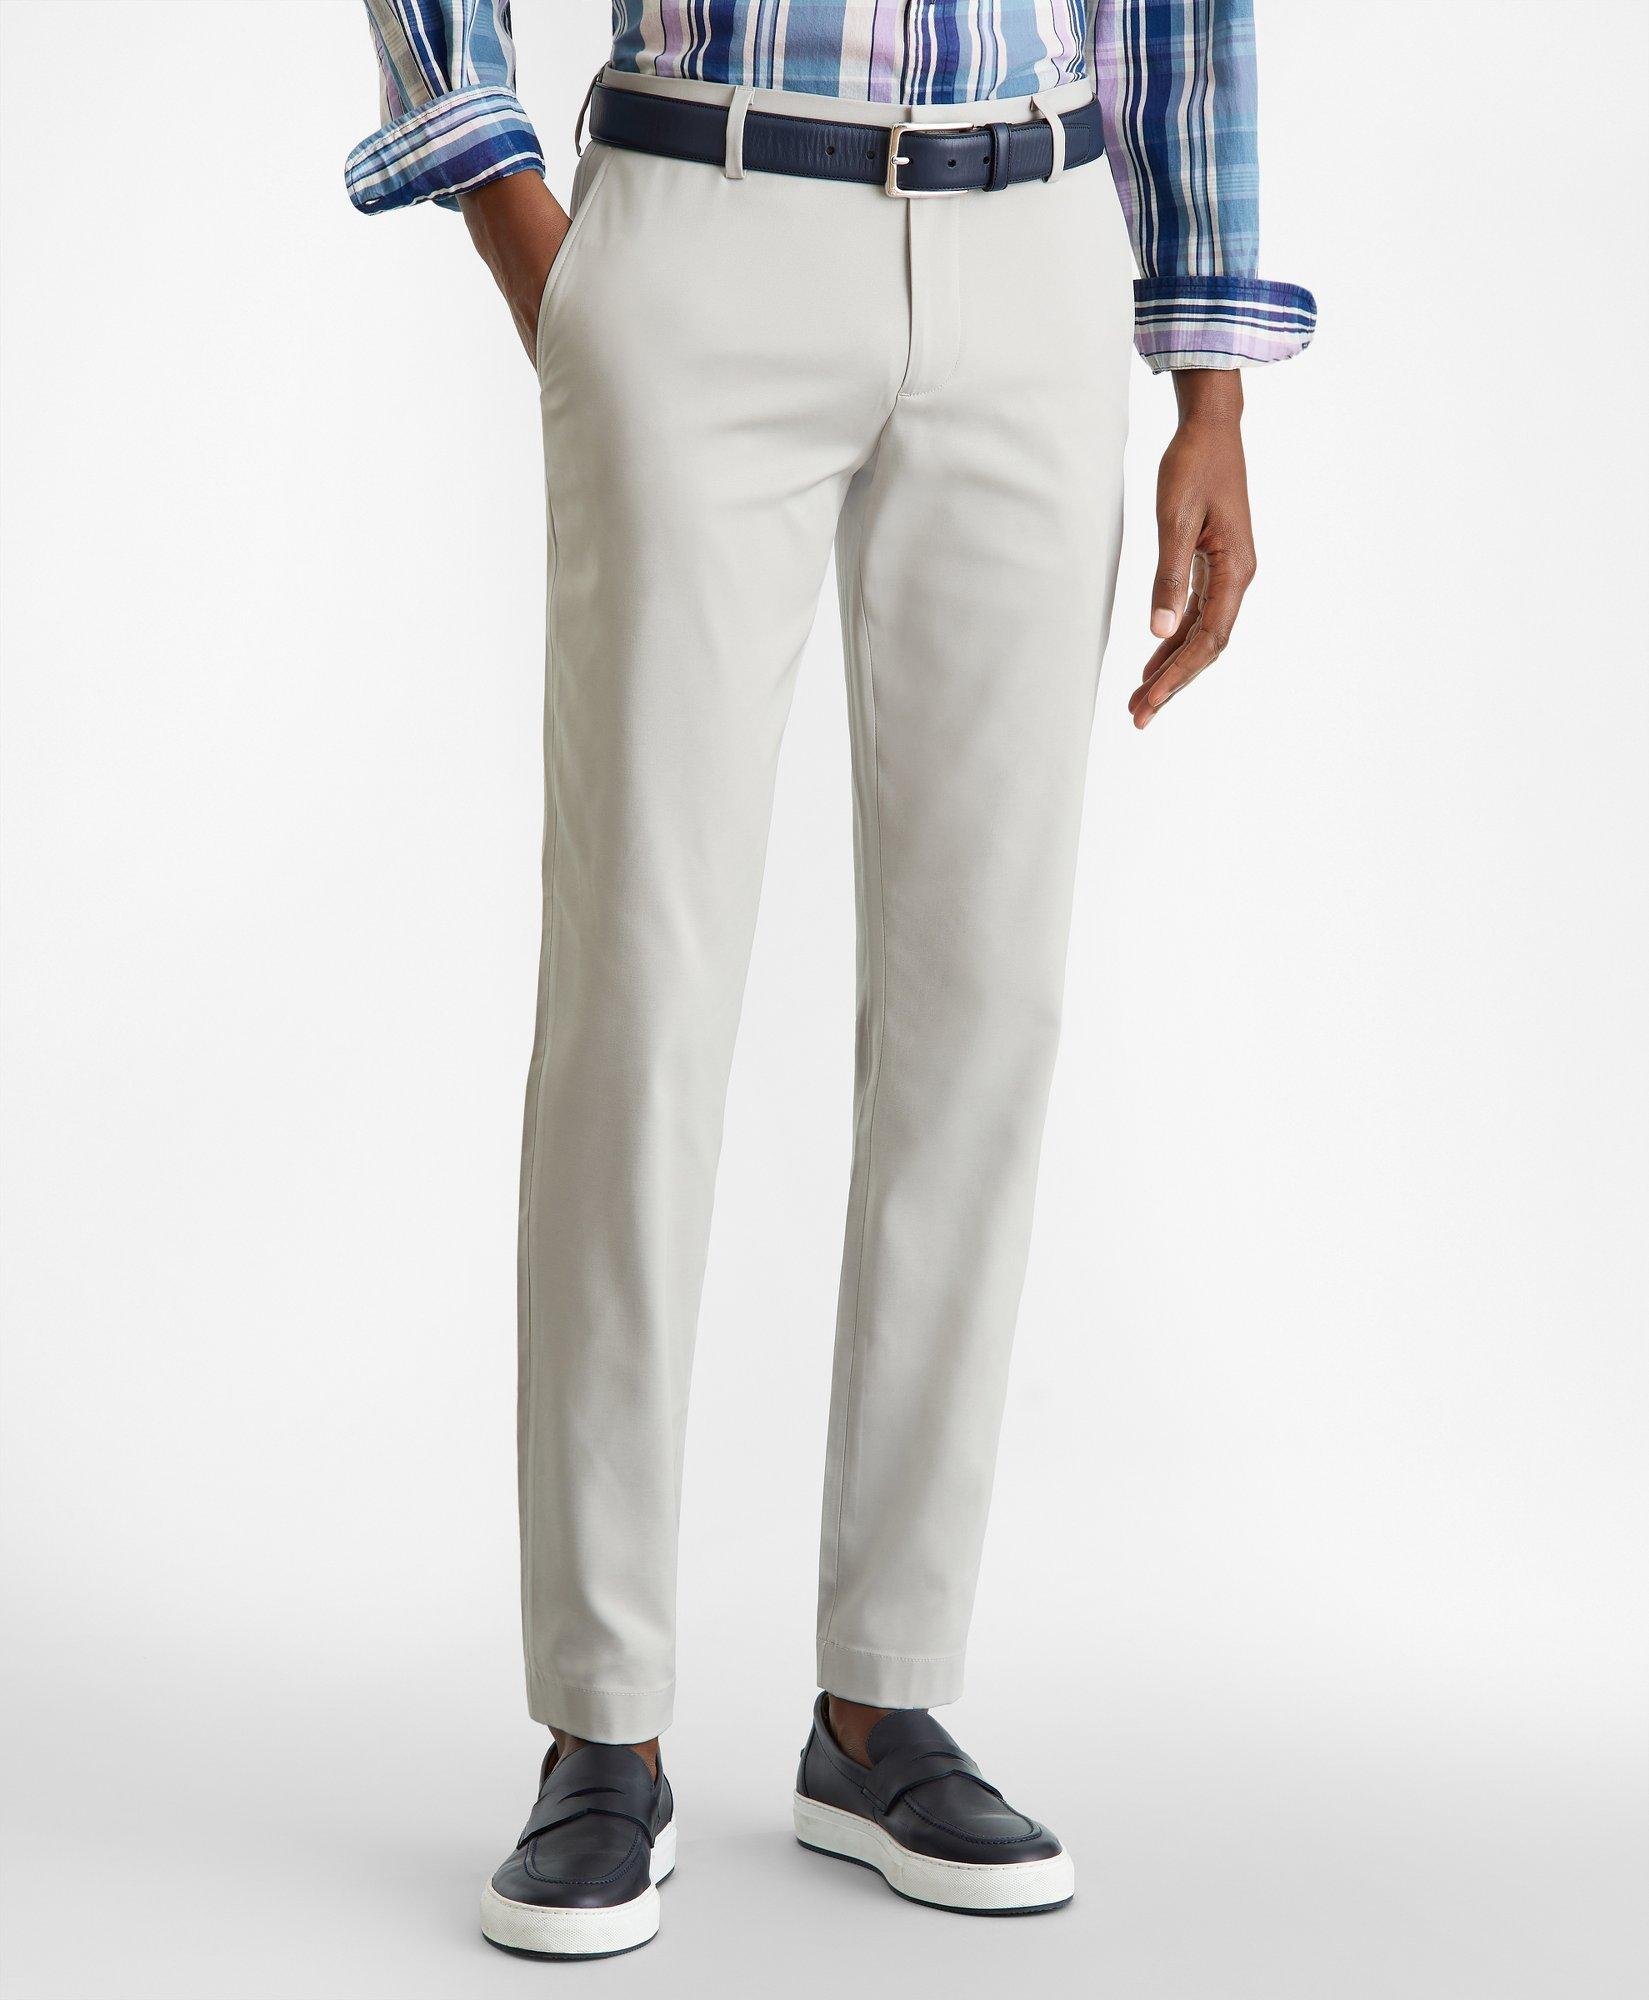 Soho Fit Brooks Brothers Stretch Performance Chino Pants